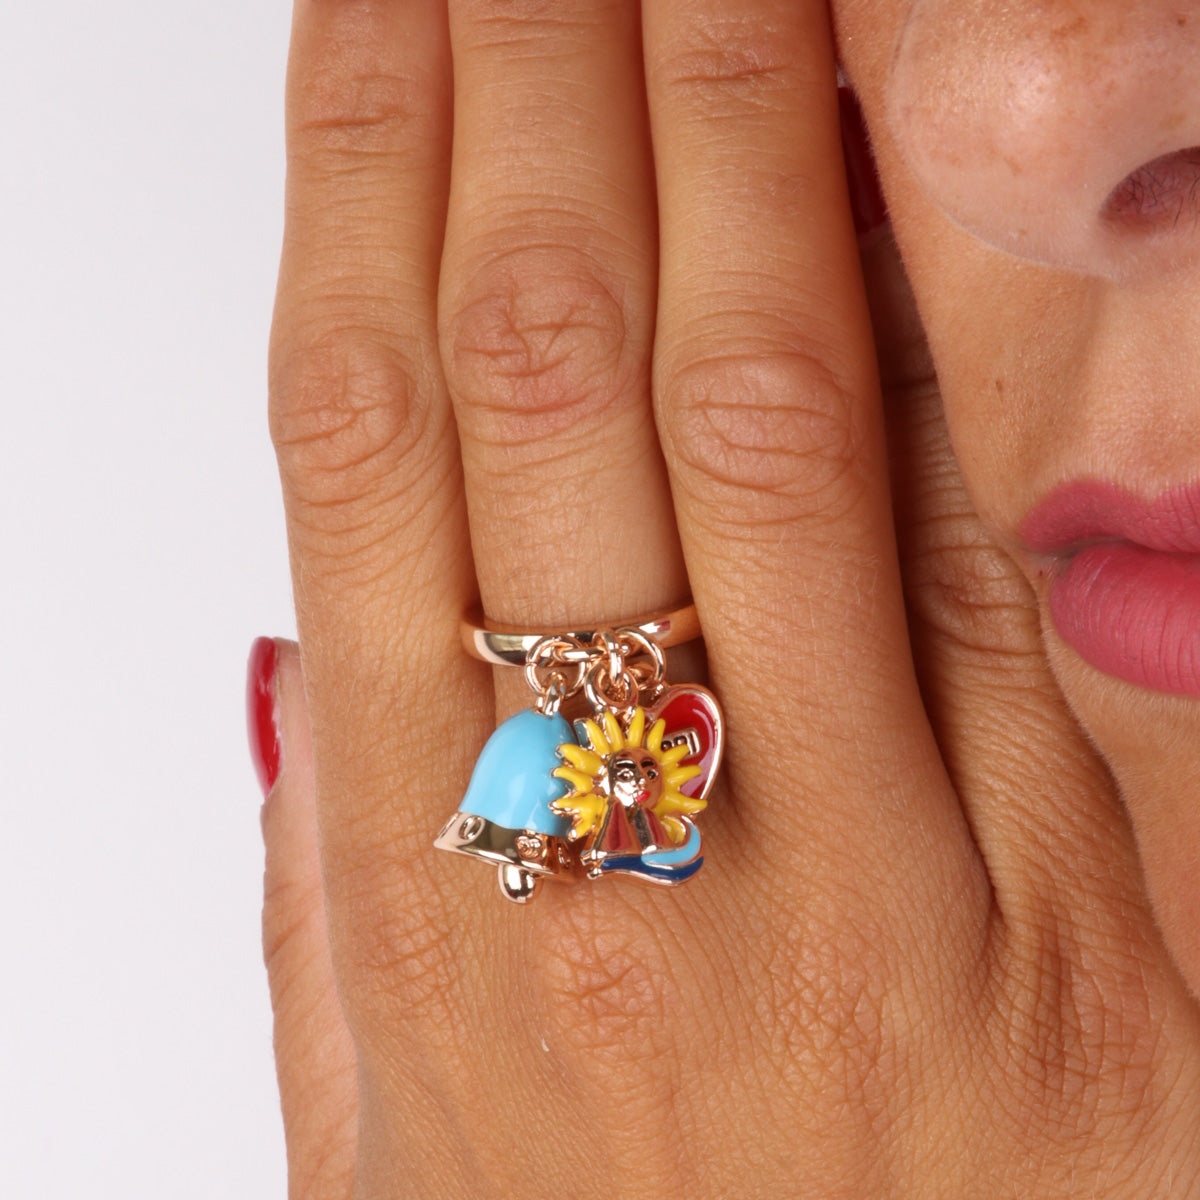 Metal ring with charming bell, sun, pharaglioni and heart with Capri